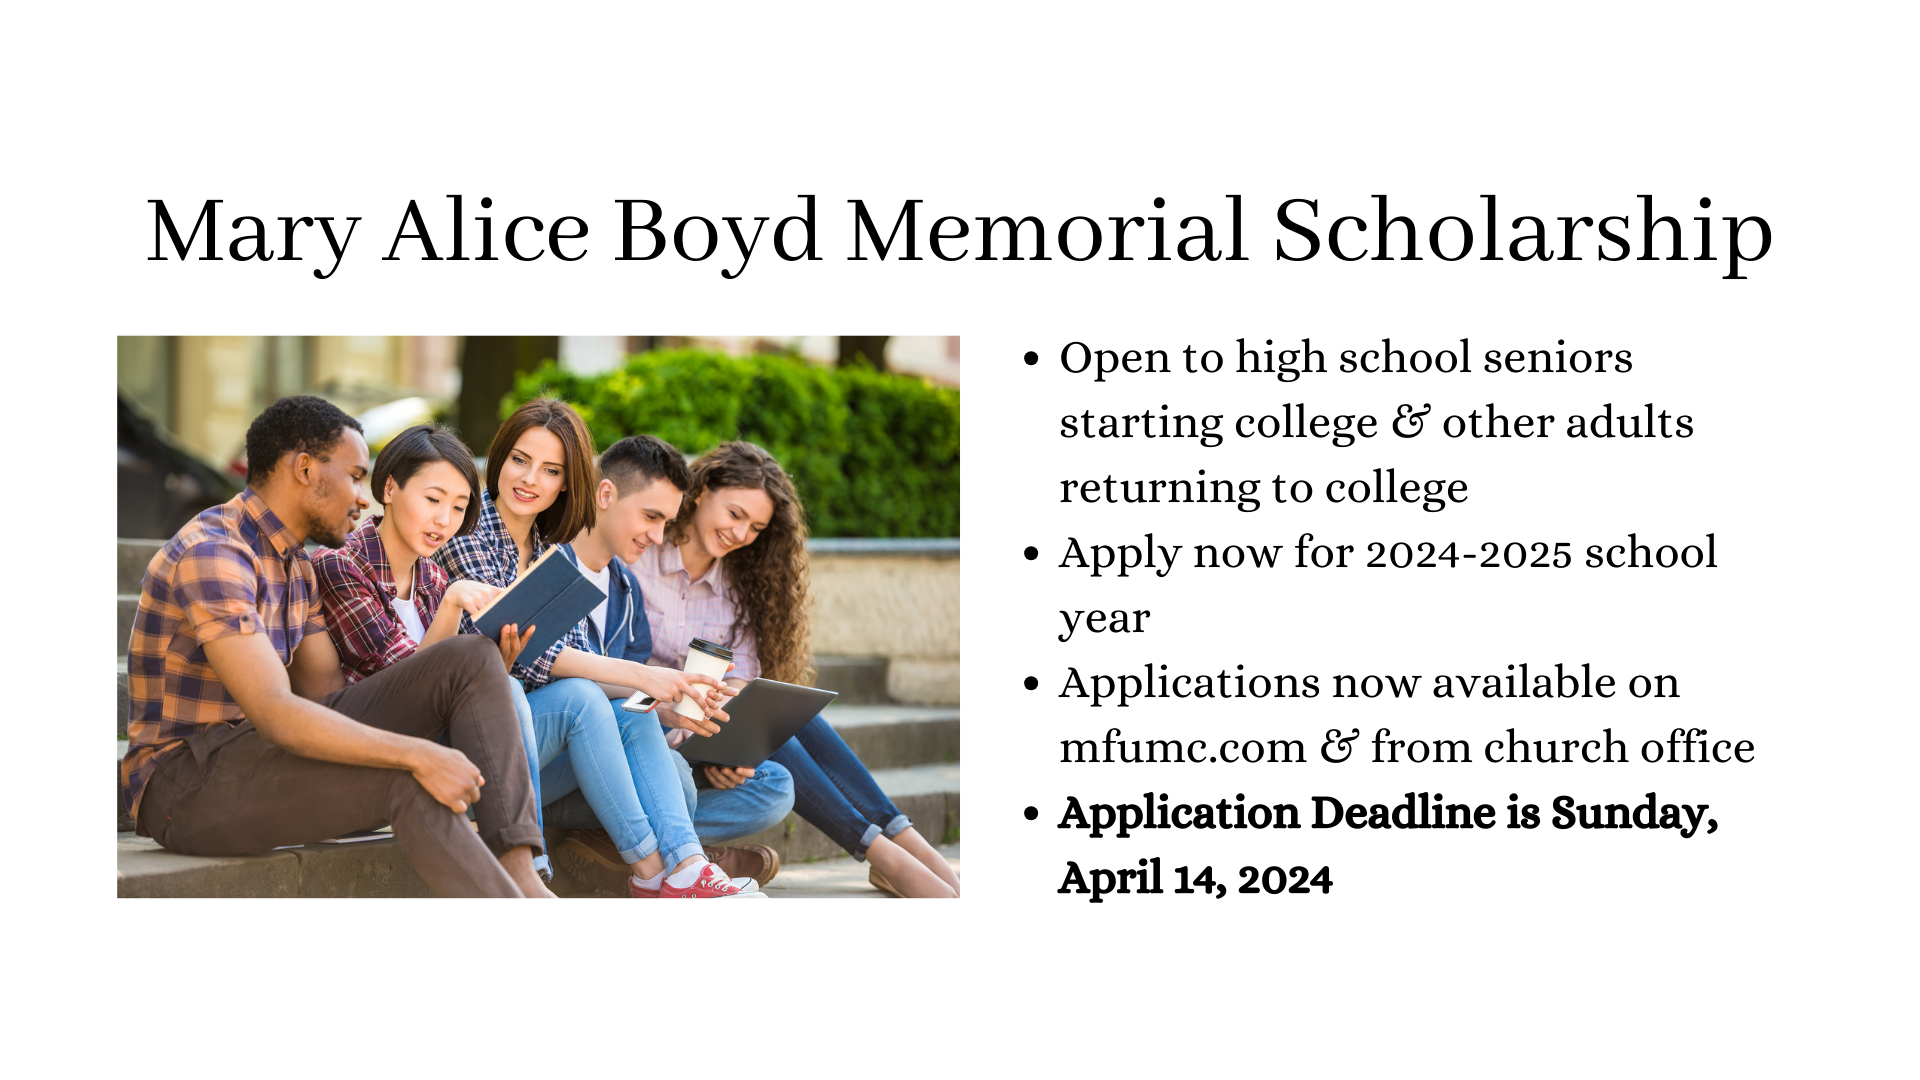 Now accepting applications for the 2024 Mary Alice Boyd Memorial Scholarship